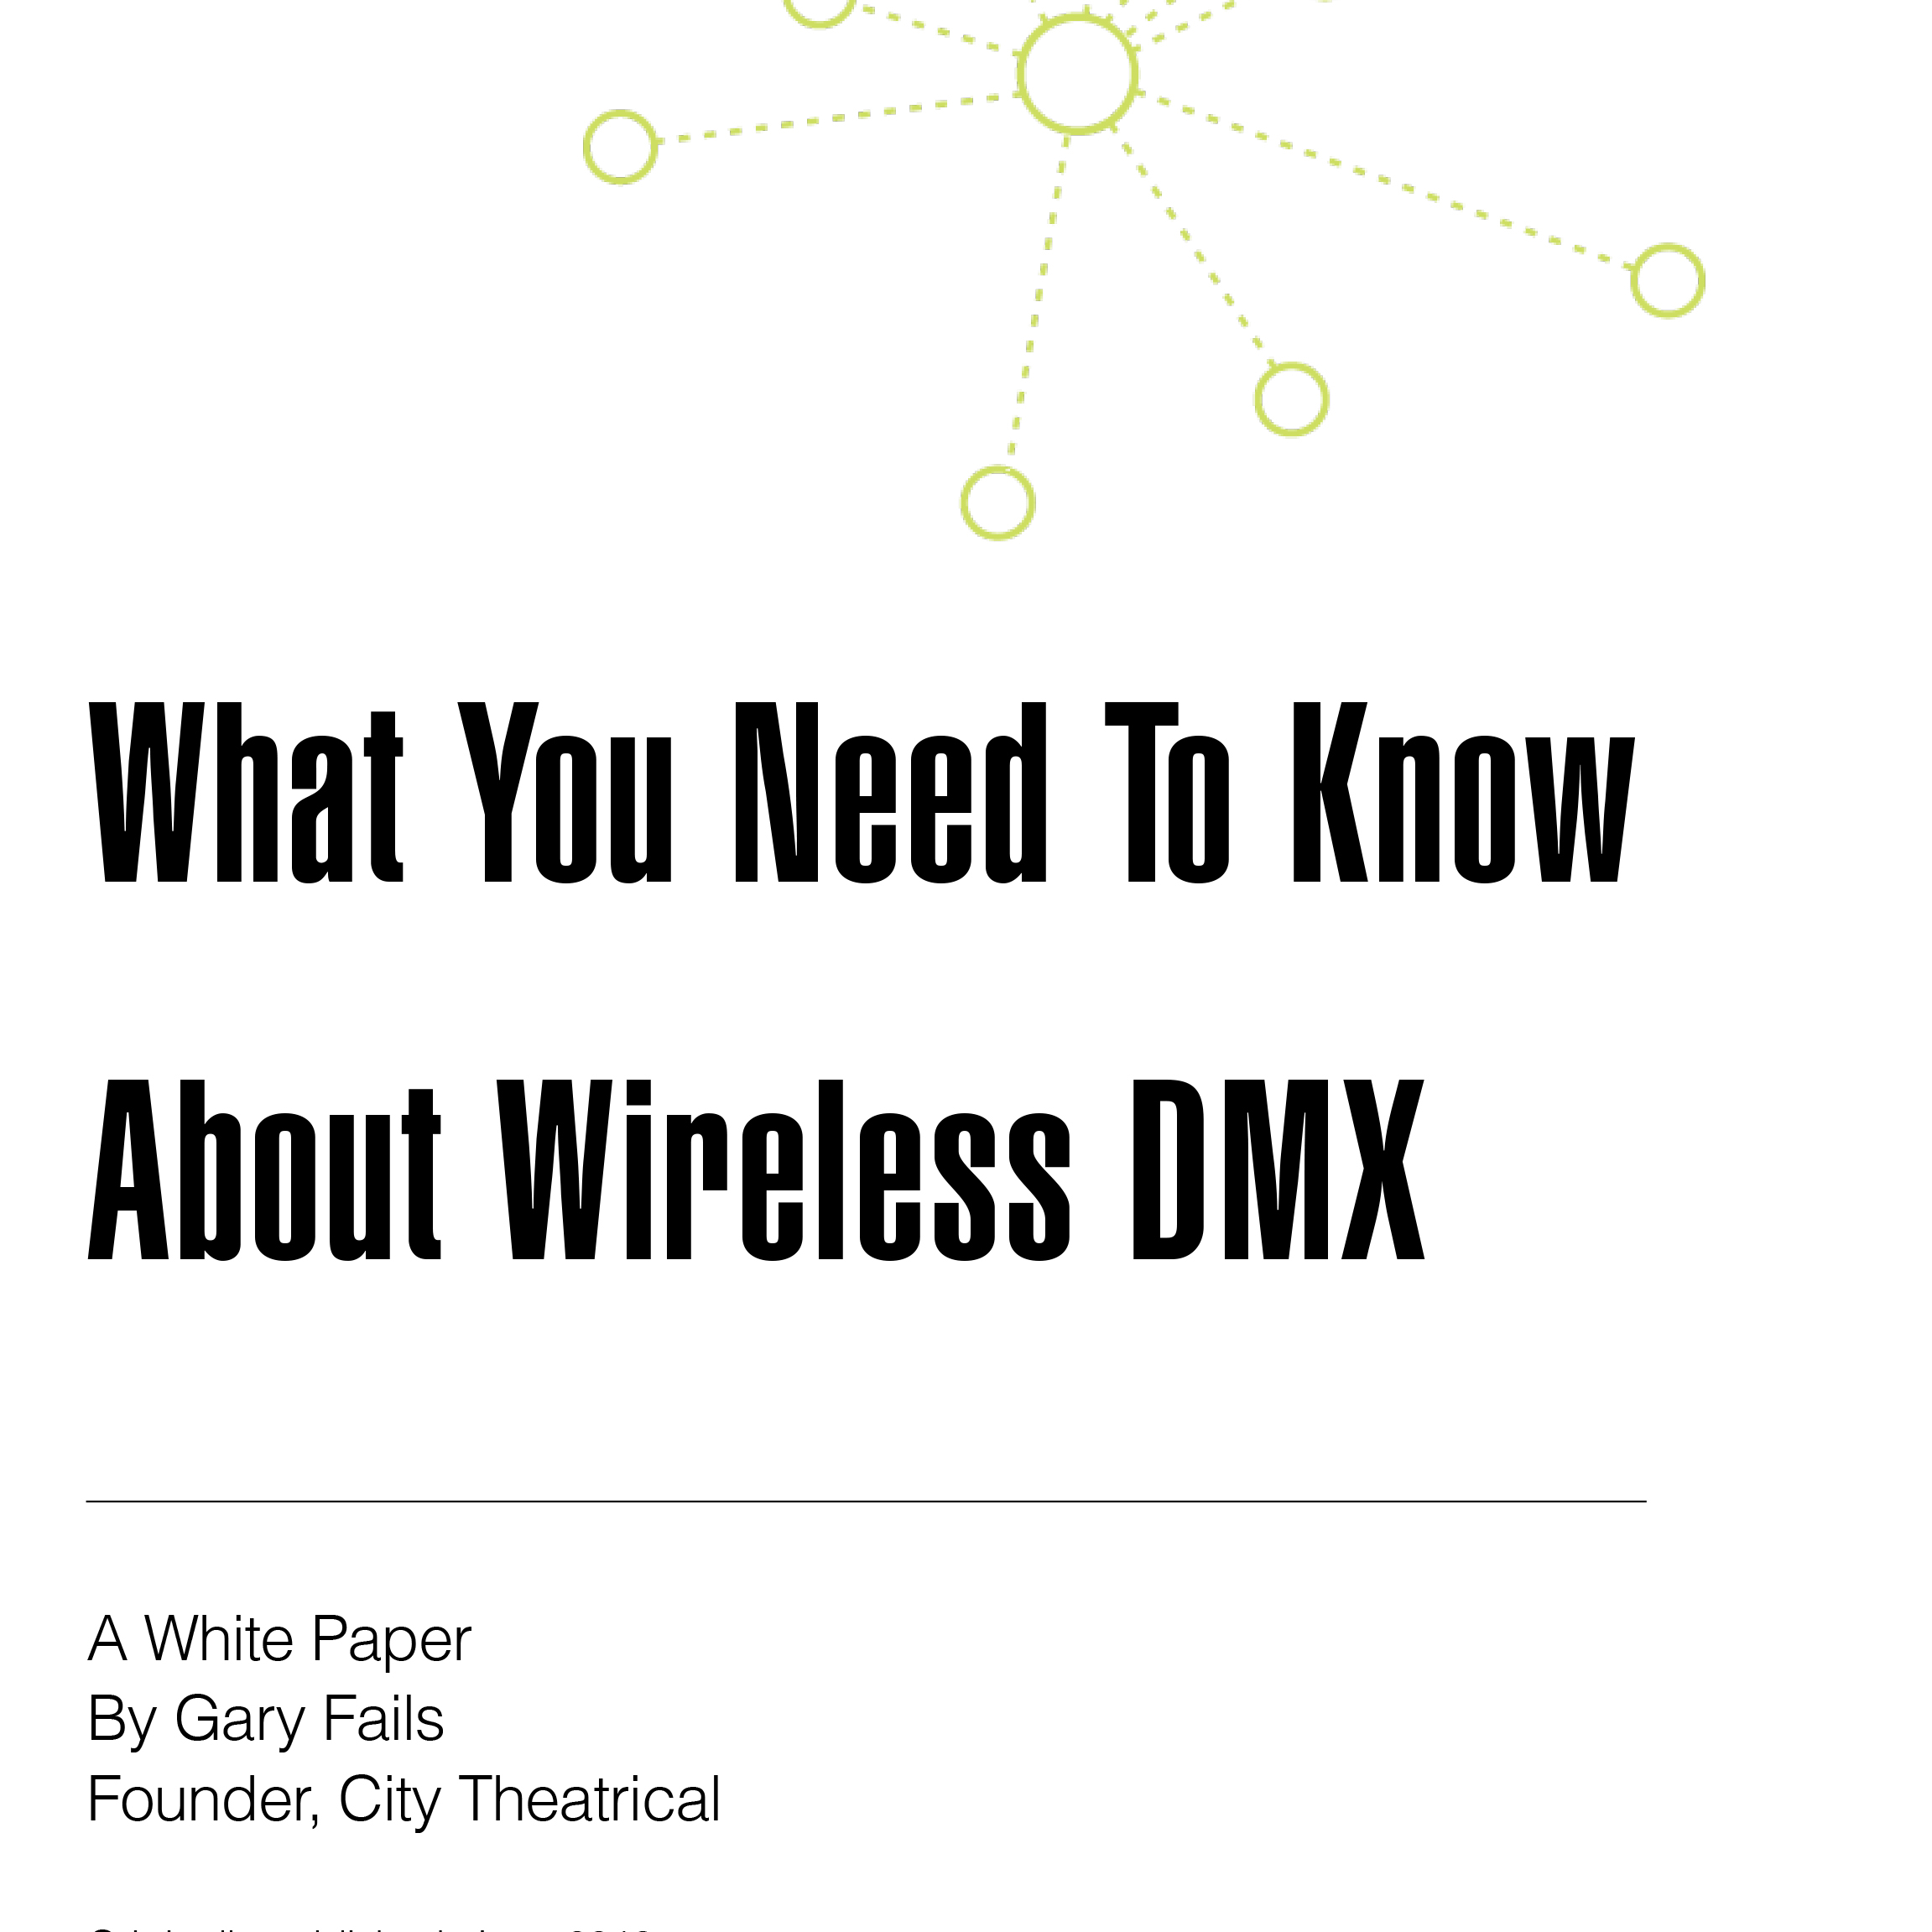 What You Need to Know About Wireless DMX, a white paper, cover art